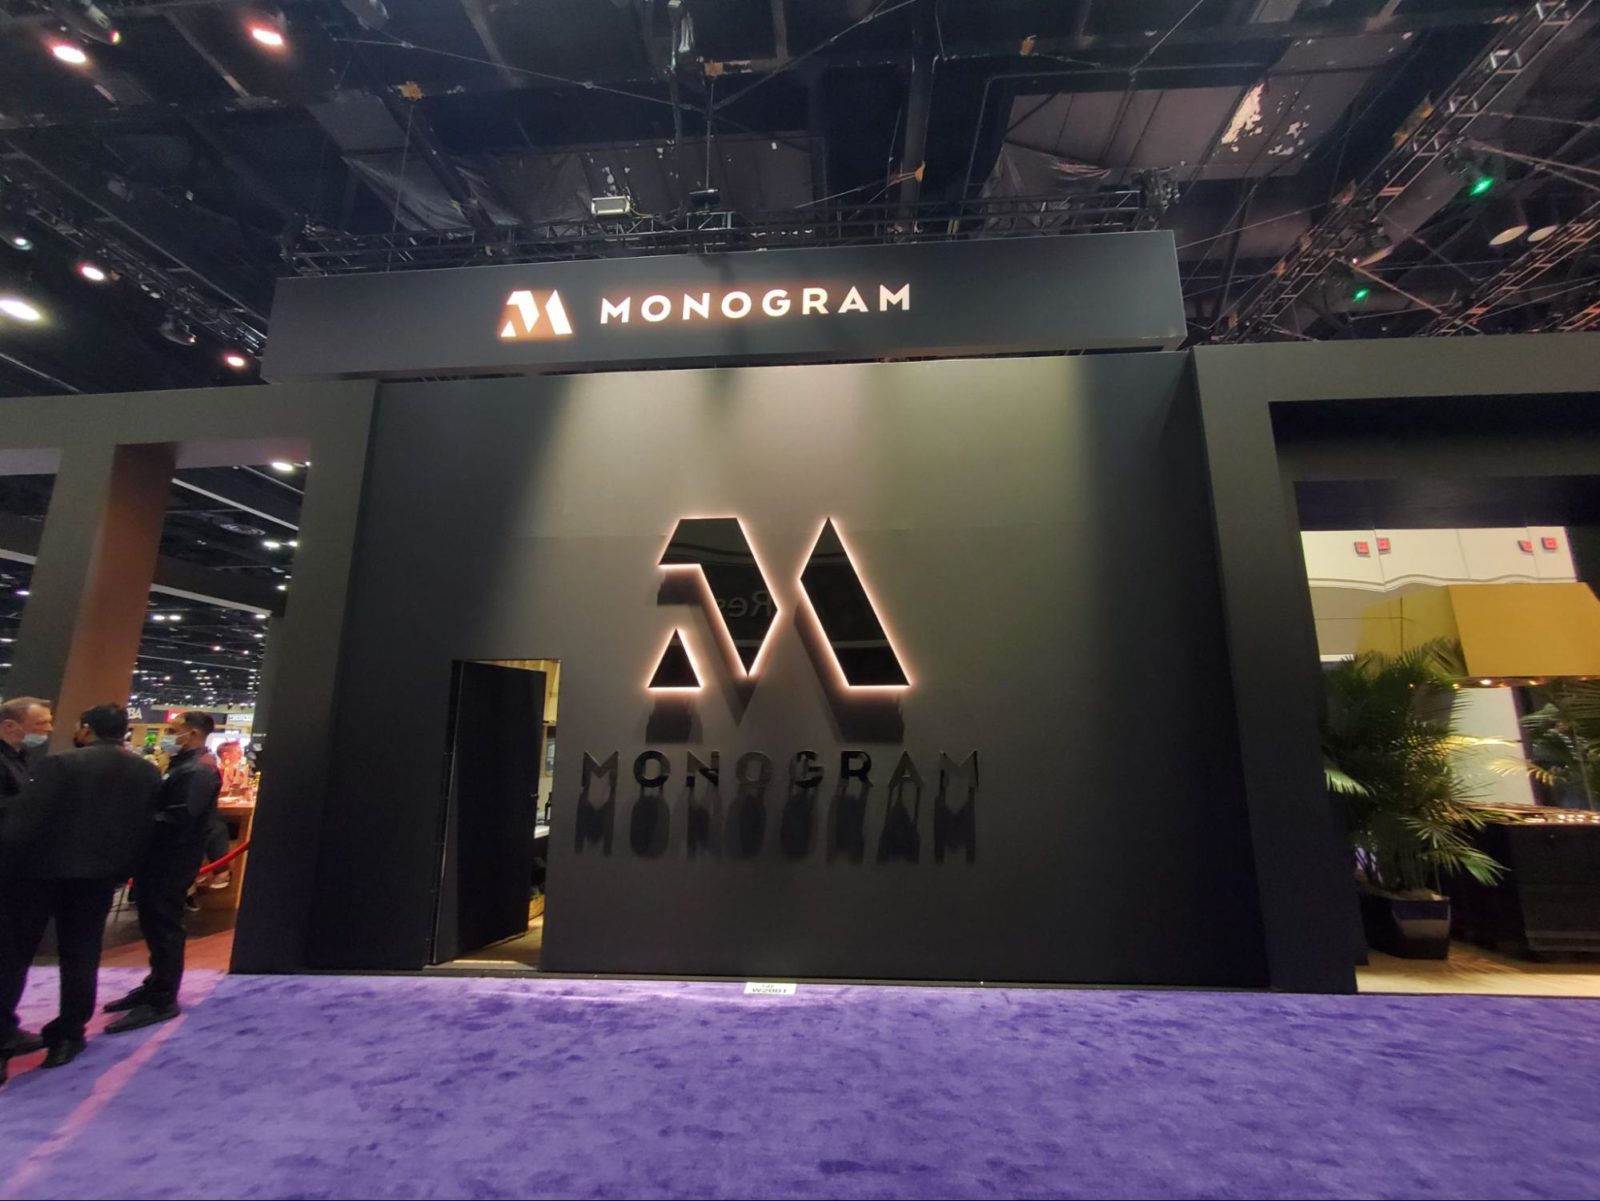 Monogram's KBIS 2022 booth was dark and mysterious.